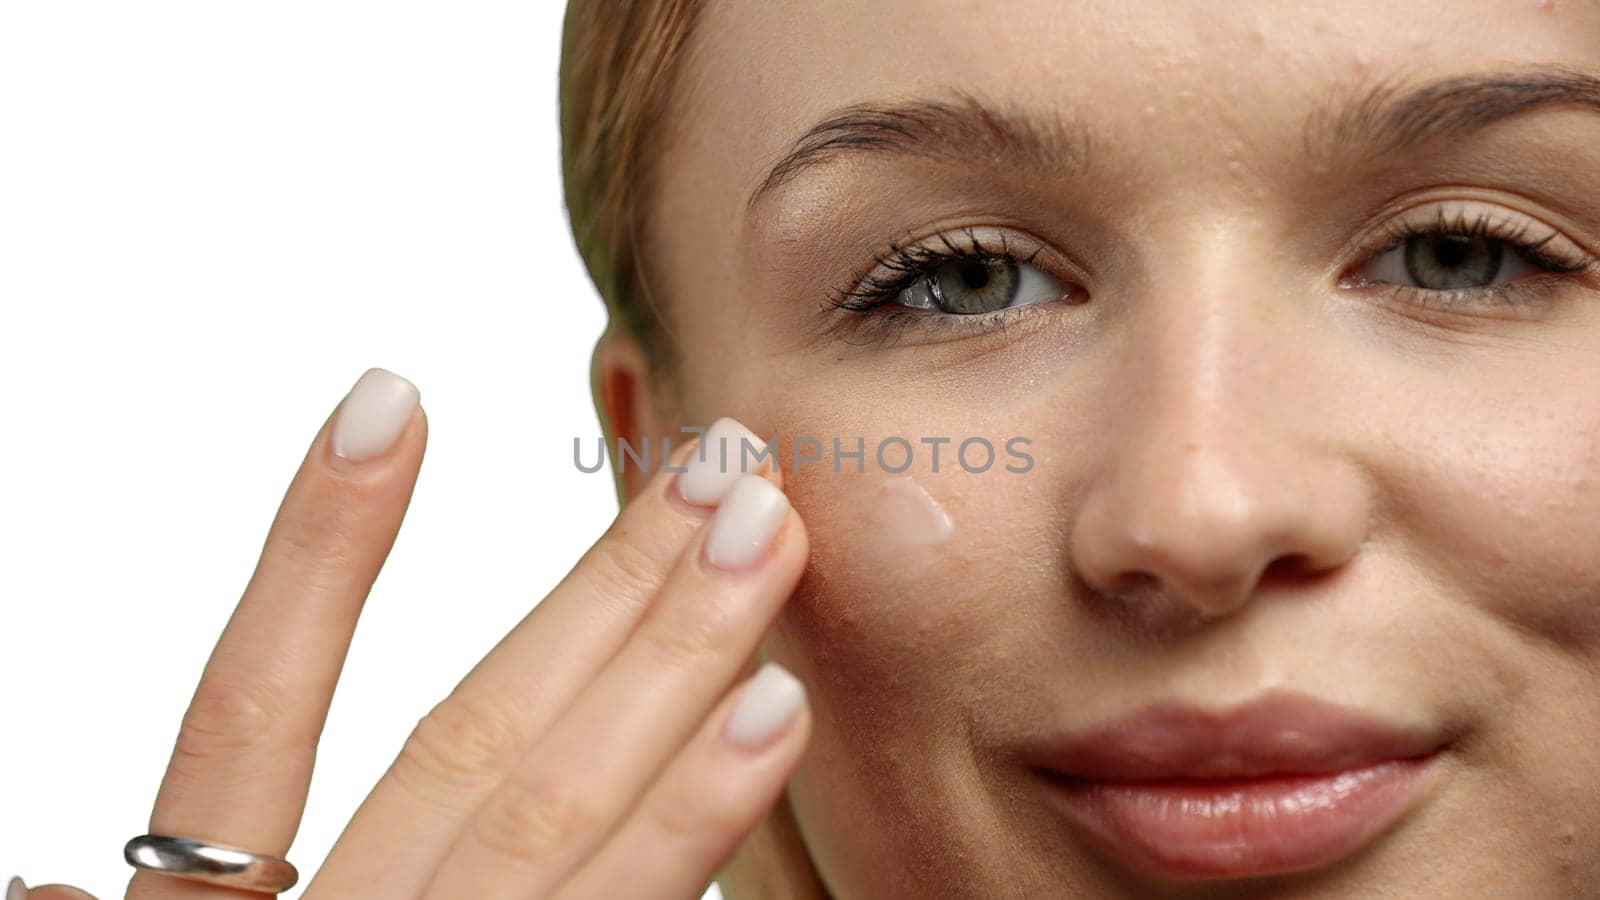 Woman's face, close-up, on a white background.